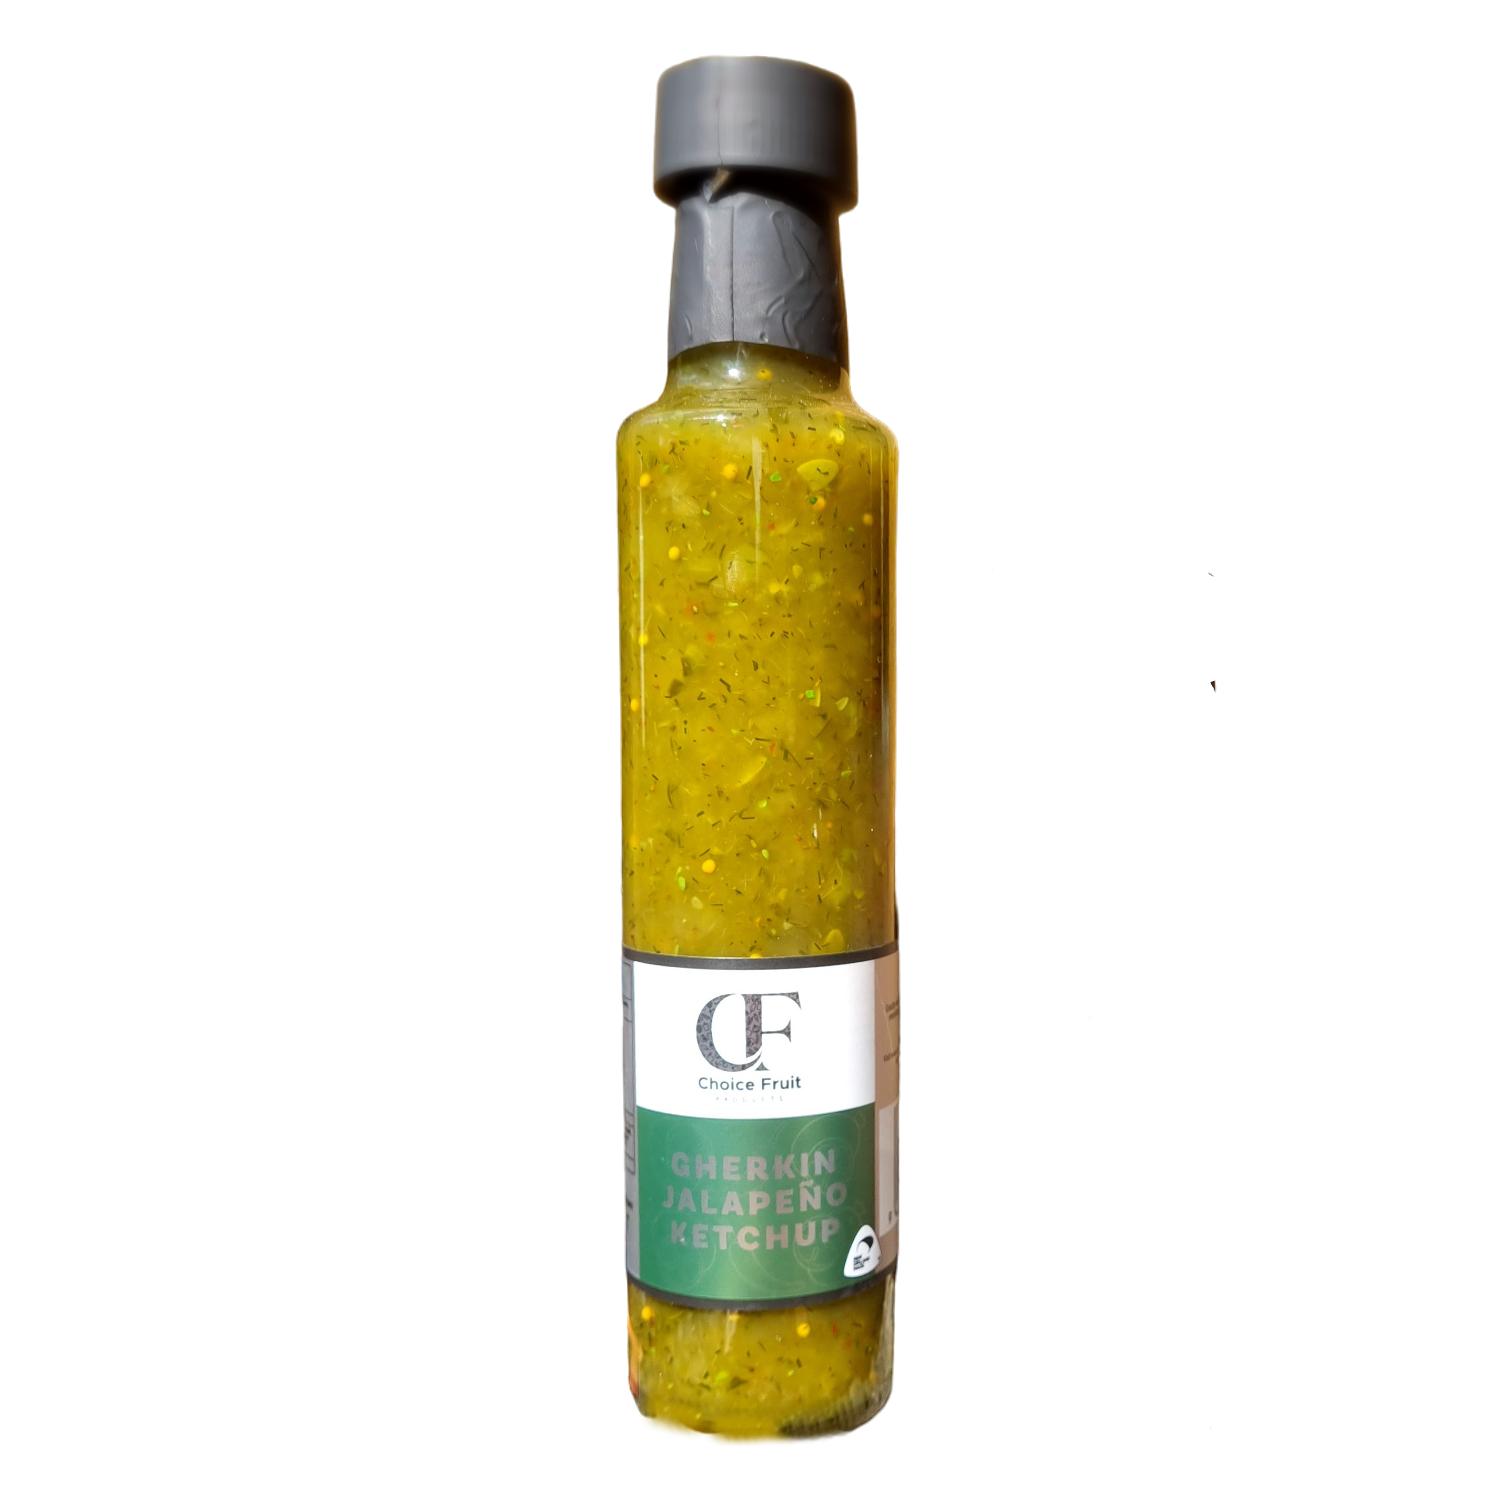 product image for Gherkin Jalapeṉo Ketchup - 110ml/300ml